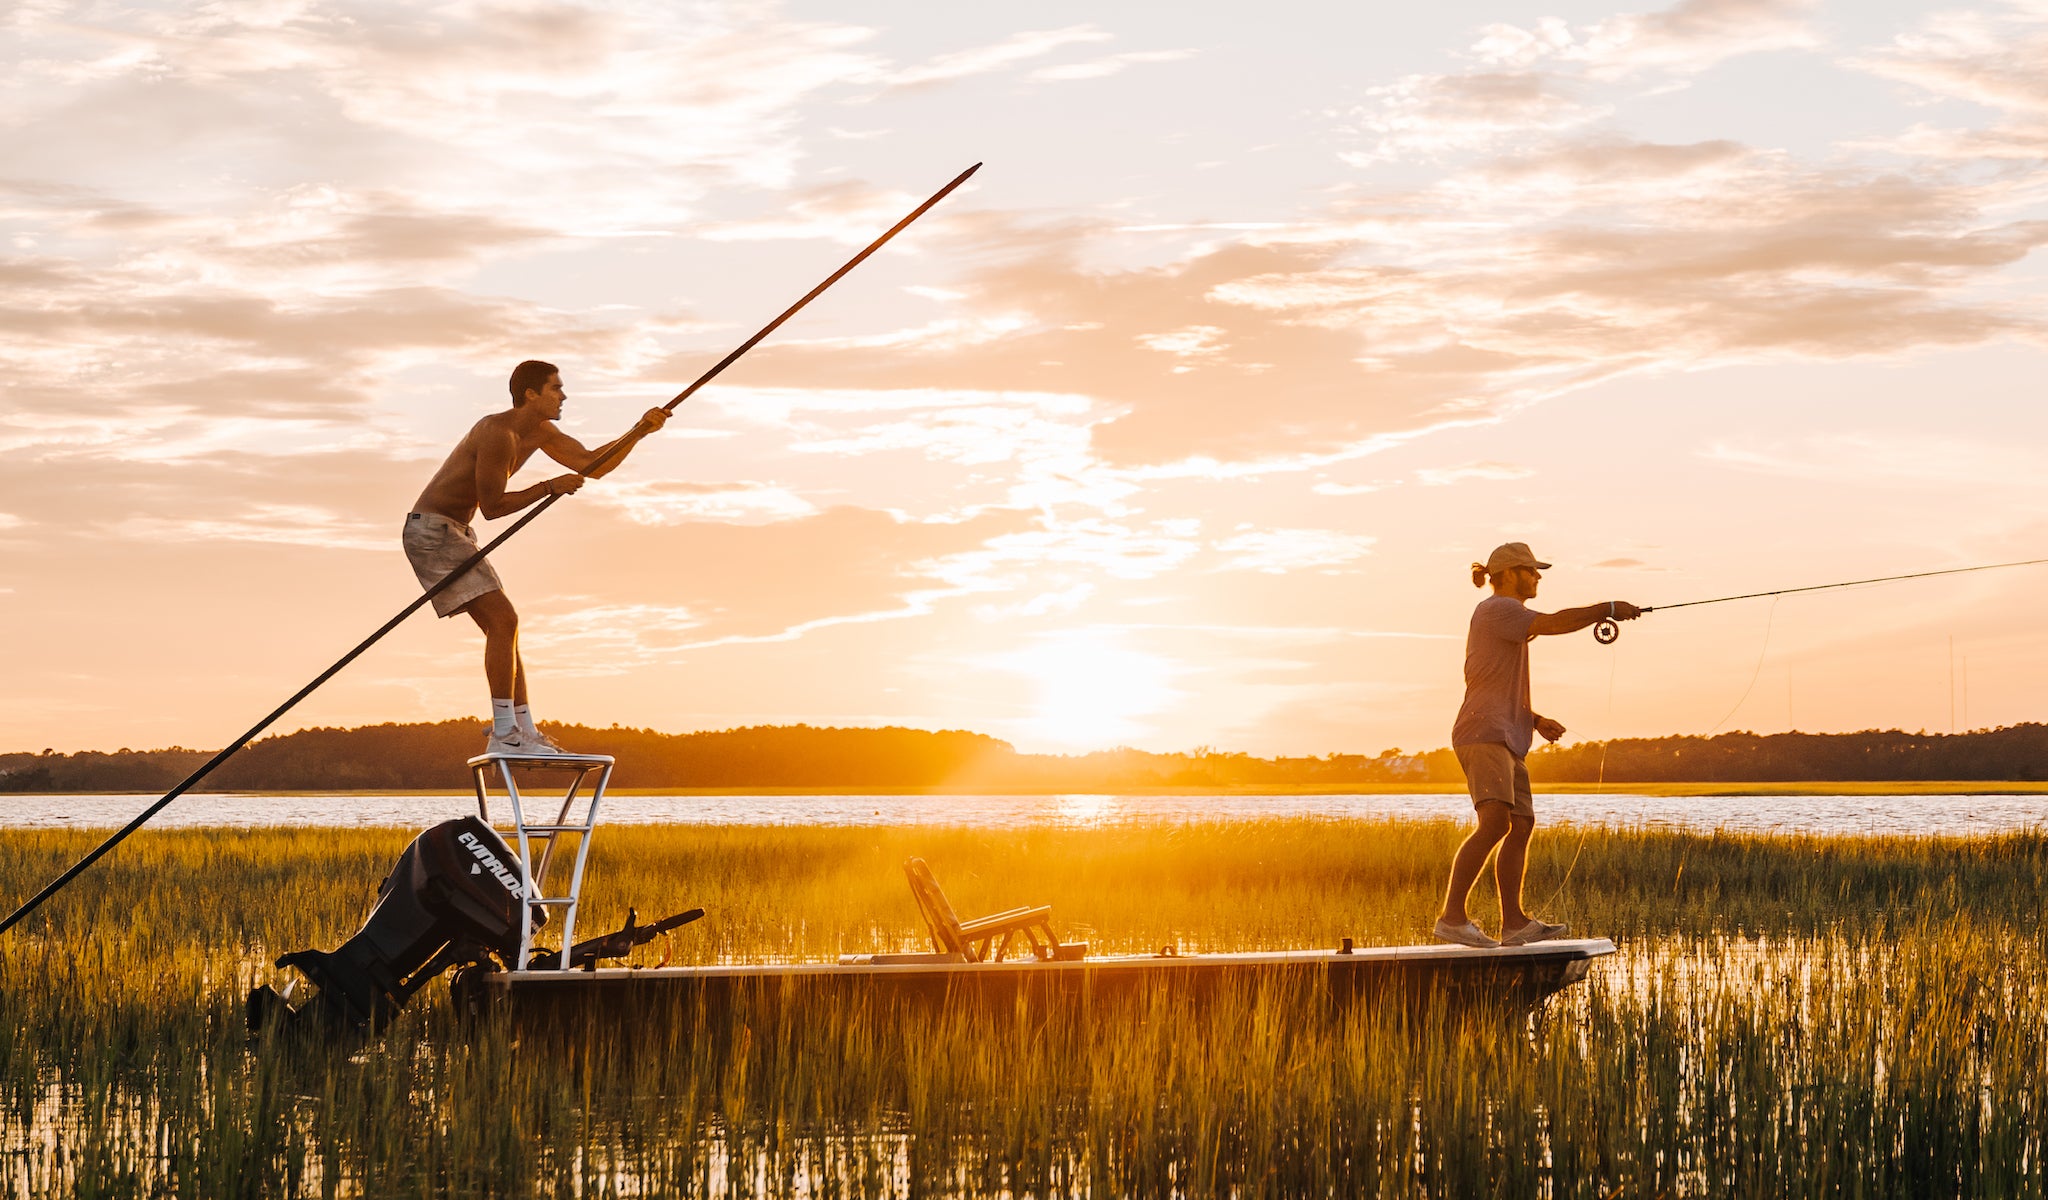 Two men fishing  in the marshland off the coast of the Carolina's with a voyager outdoor chair as the center console on their boat.